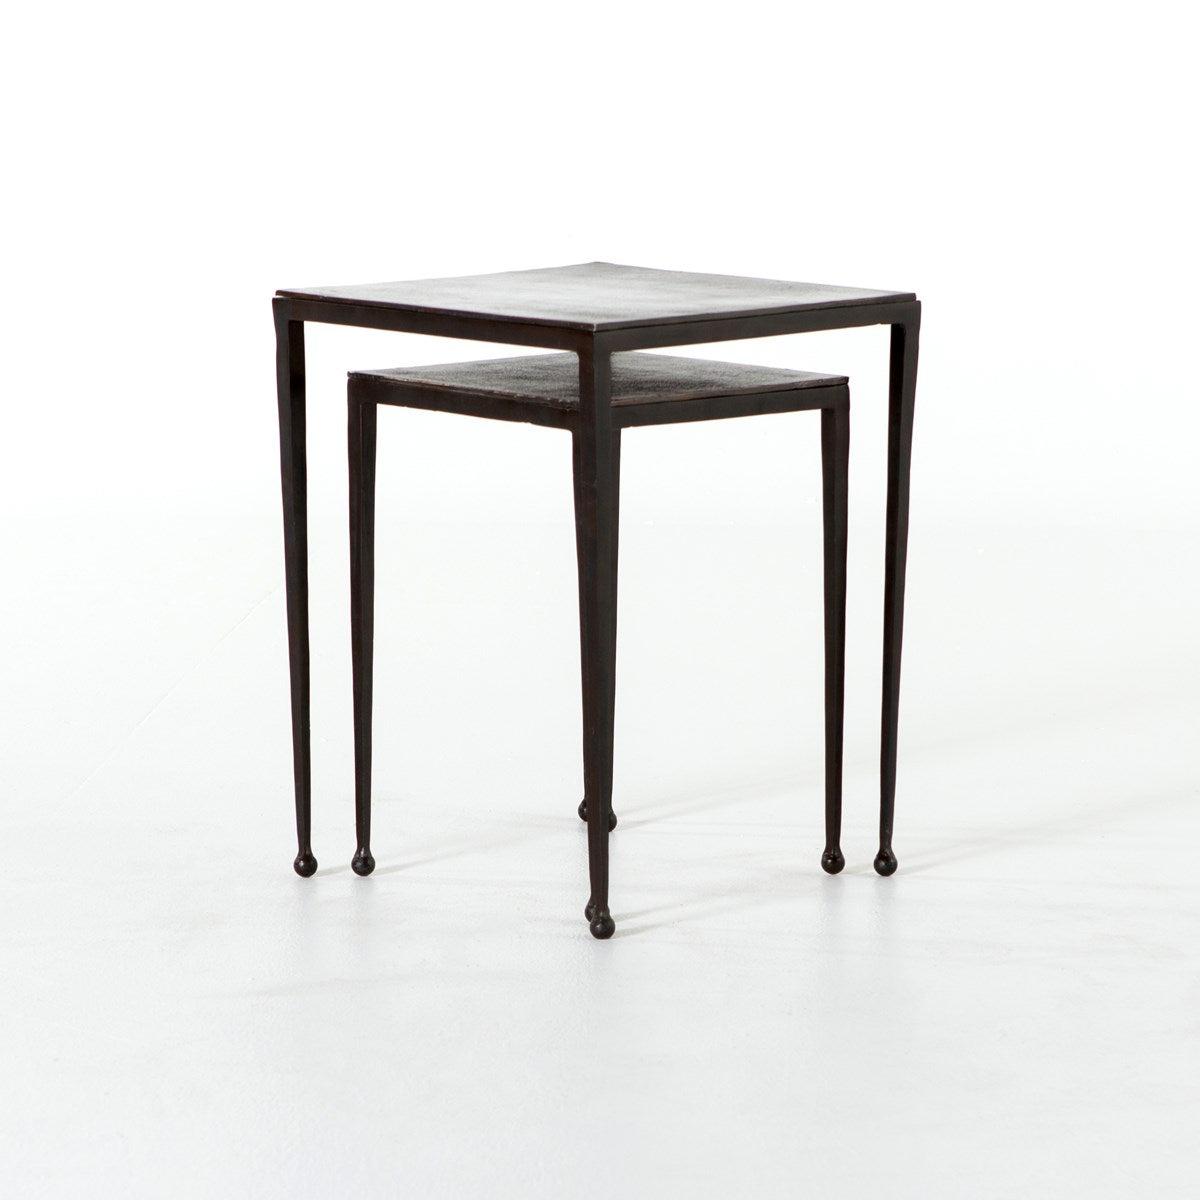 Dalston Nesting End Tables-Antique Rust Table Four Hands     Four Hands, Burke Decor, Mid Century Modern Furniture, Old Bones Furniture Company, Old Bones Co, Modern Mid Century, Designer Furniture, https://www.oldbonesco.com/